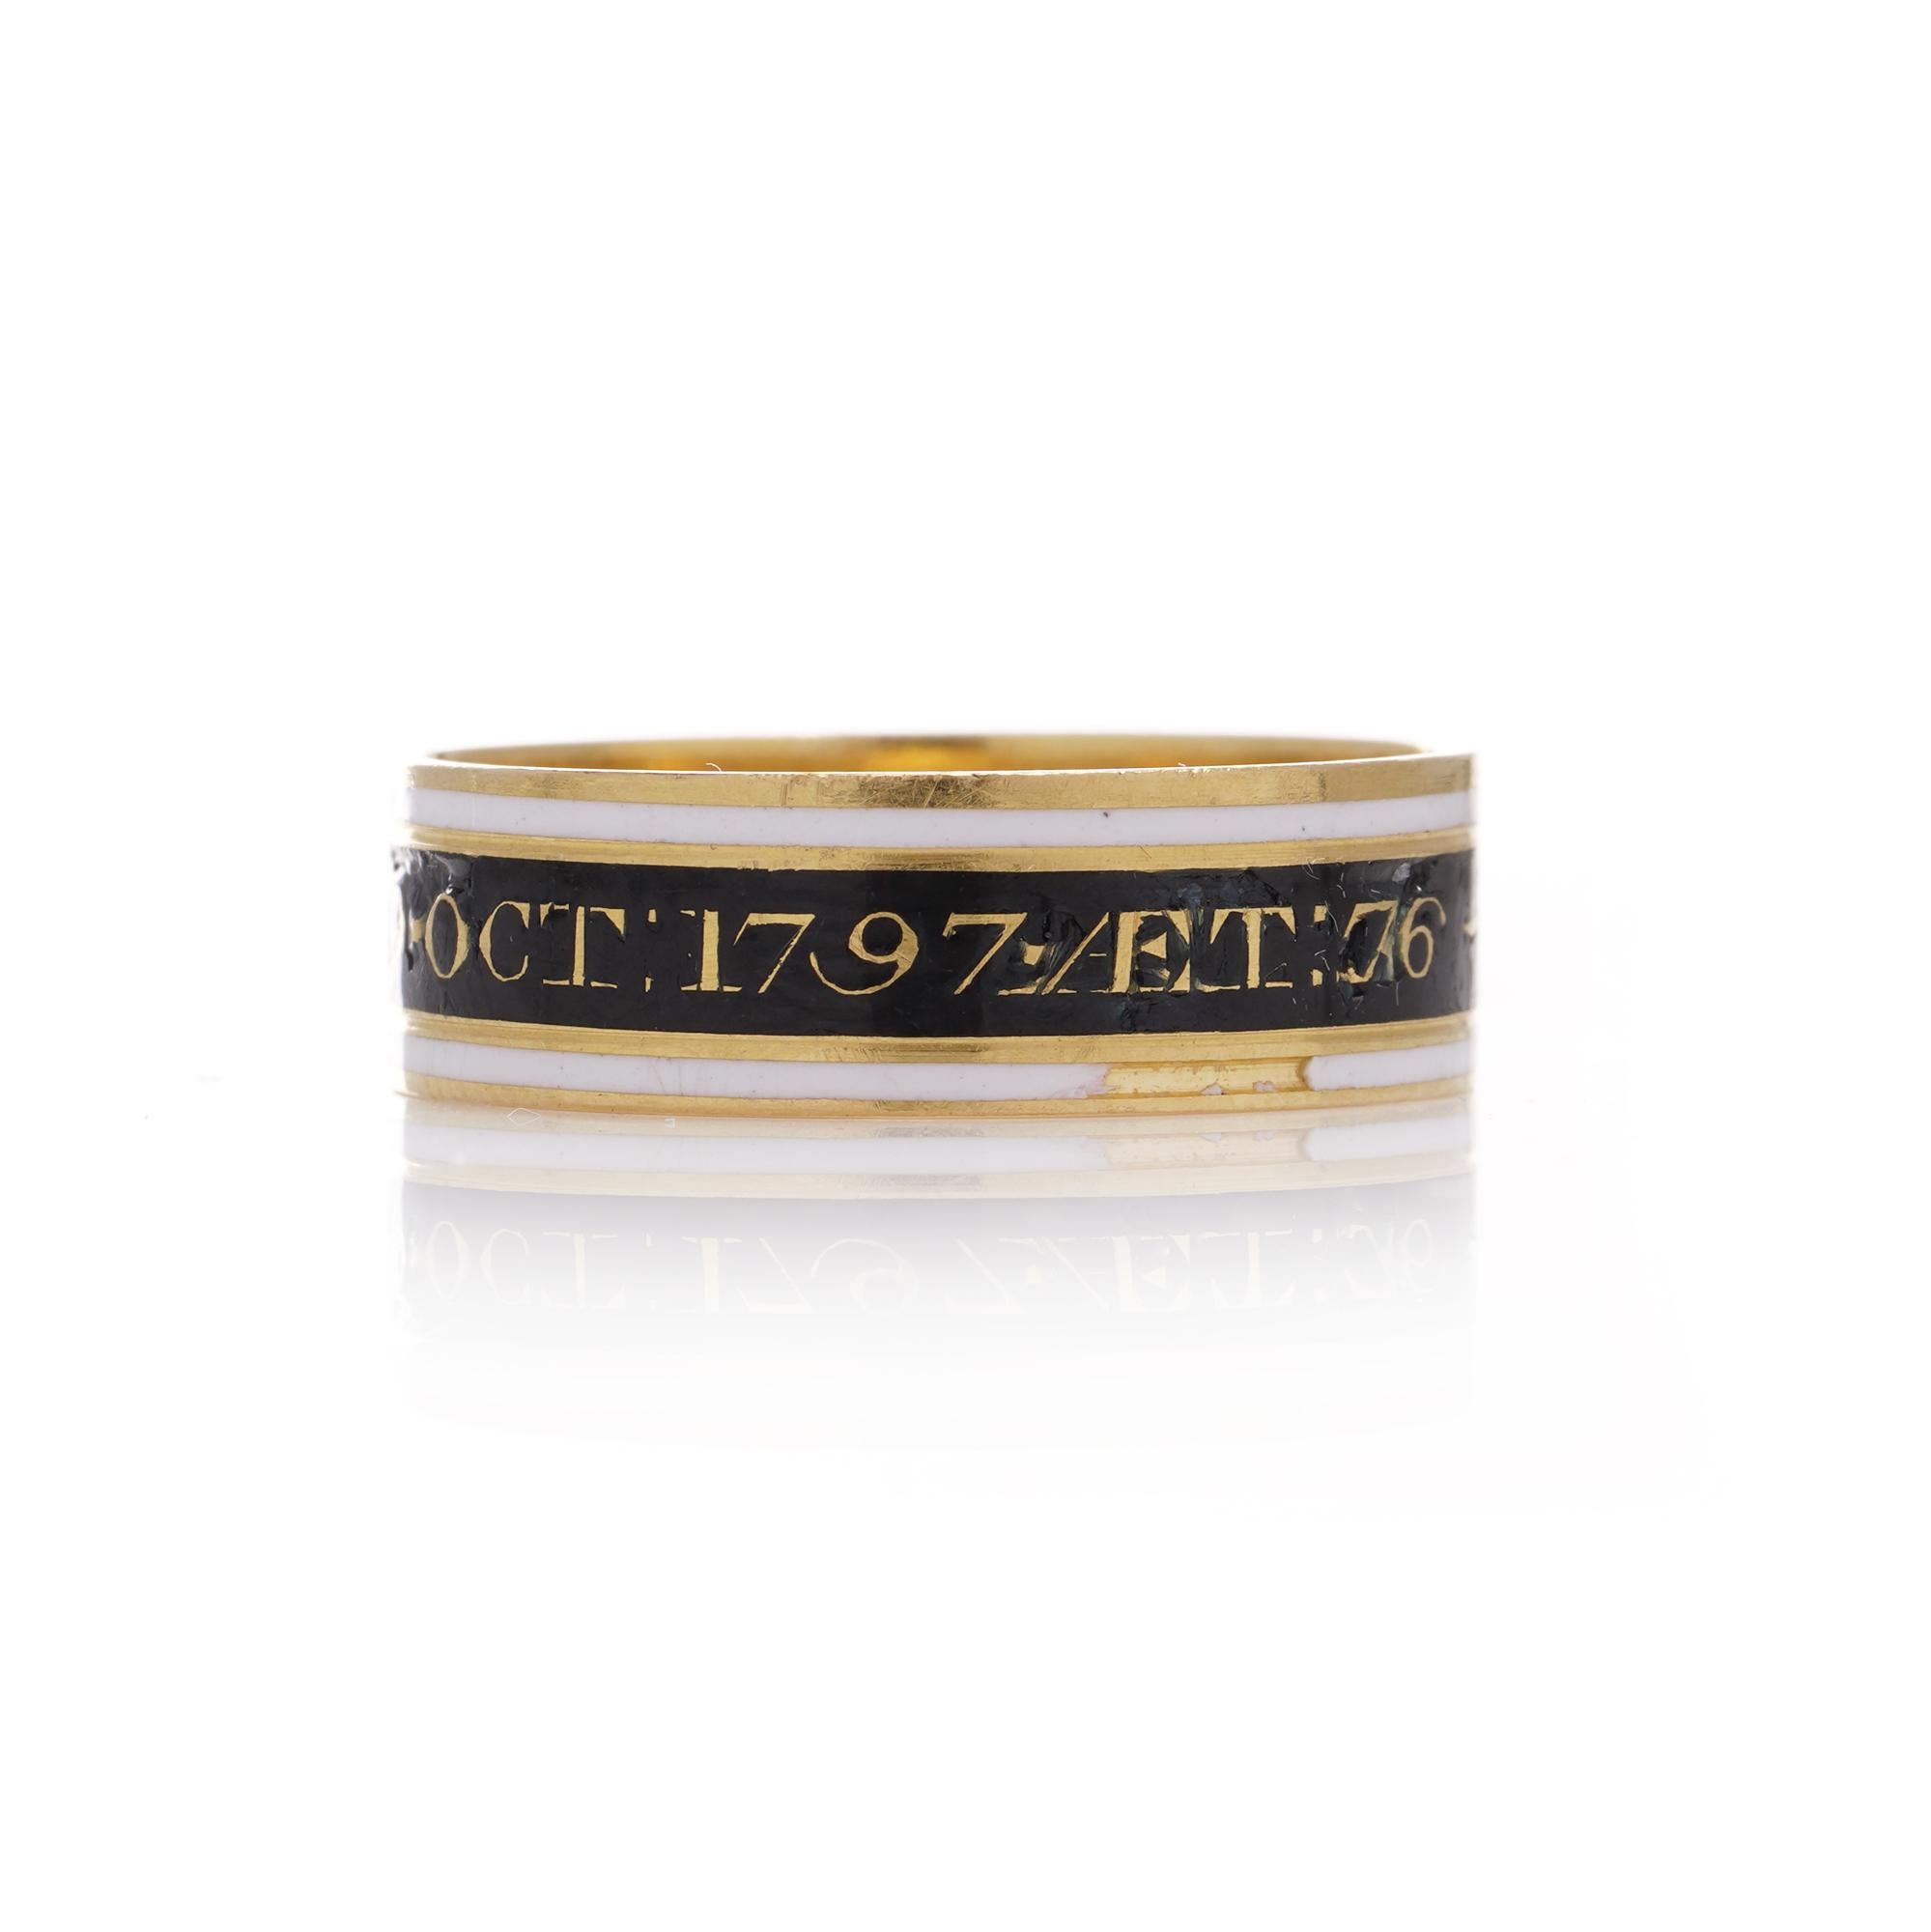 22kt Yellow Gold Mourning Ring with Enamel Band  In Good Condition For Sale In Braintree, GB